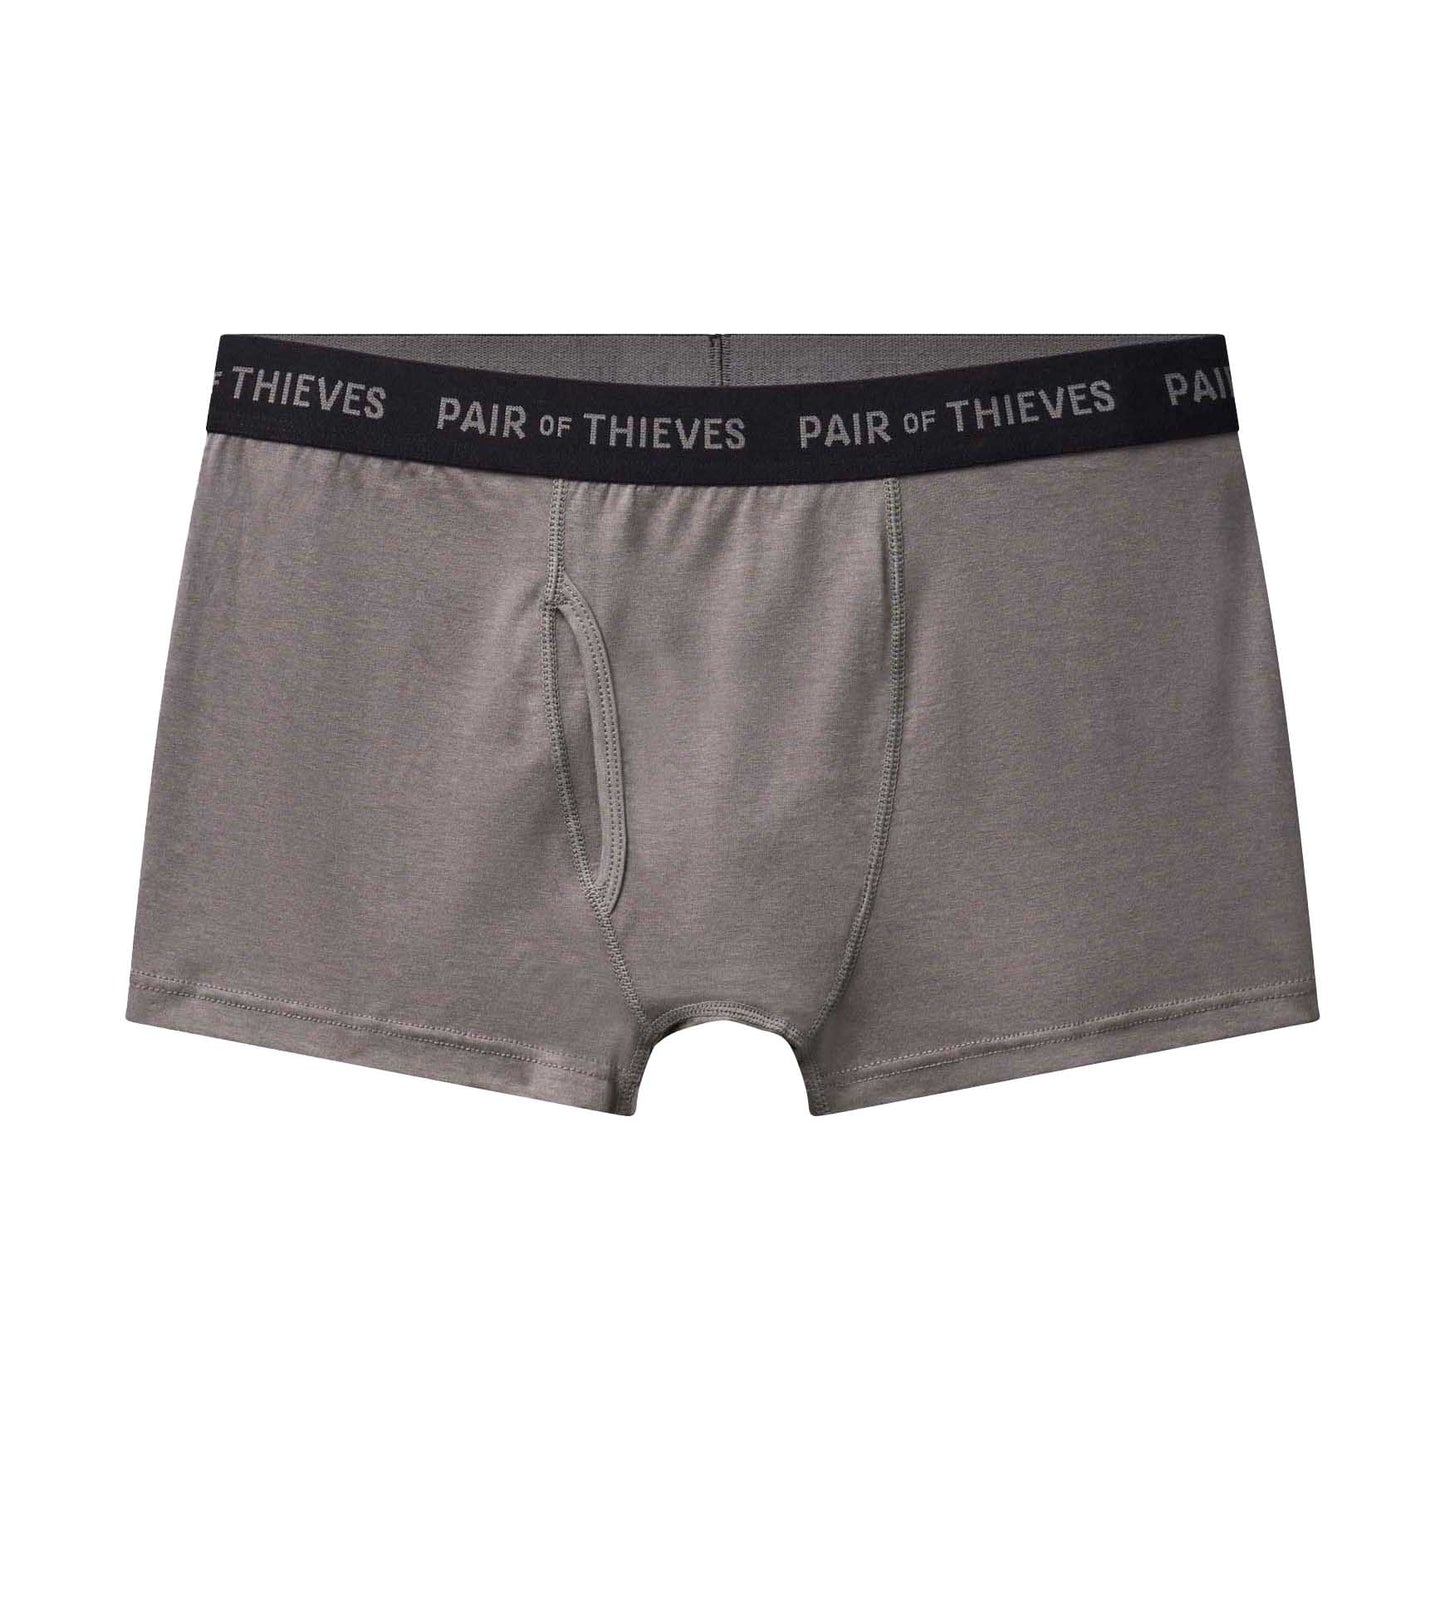 PAIR OF THIEVES - Men's SuperSoft Trunks 2pk – Beyond Marketplace